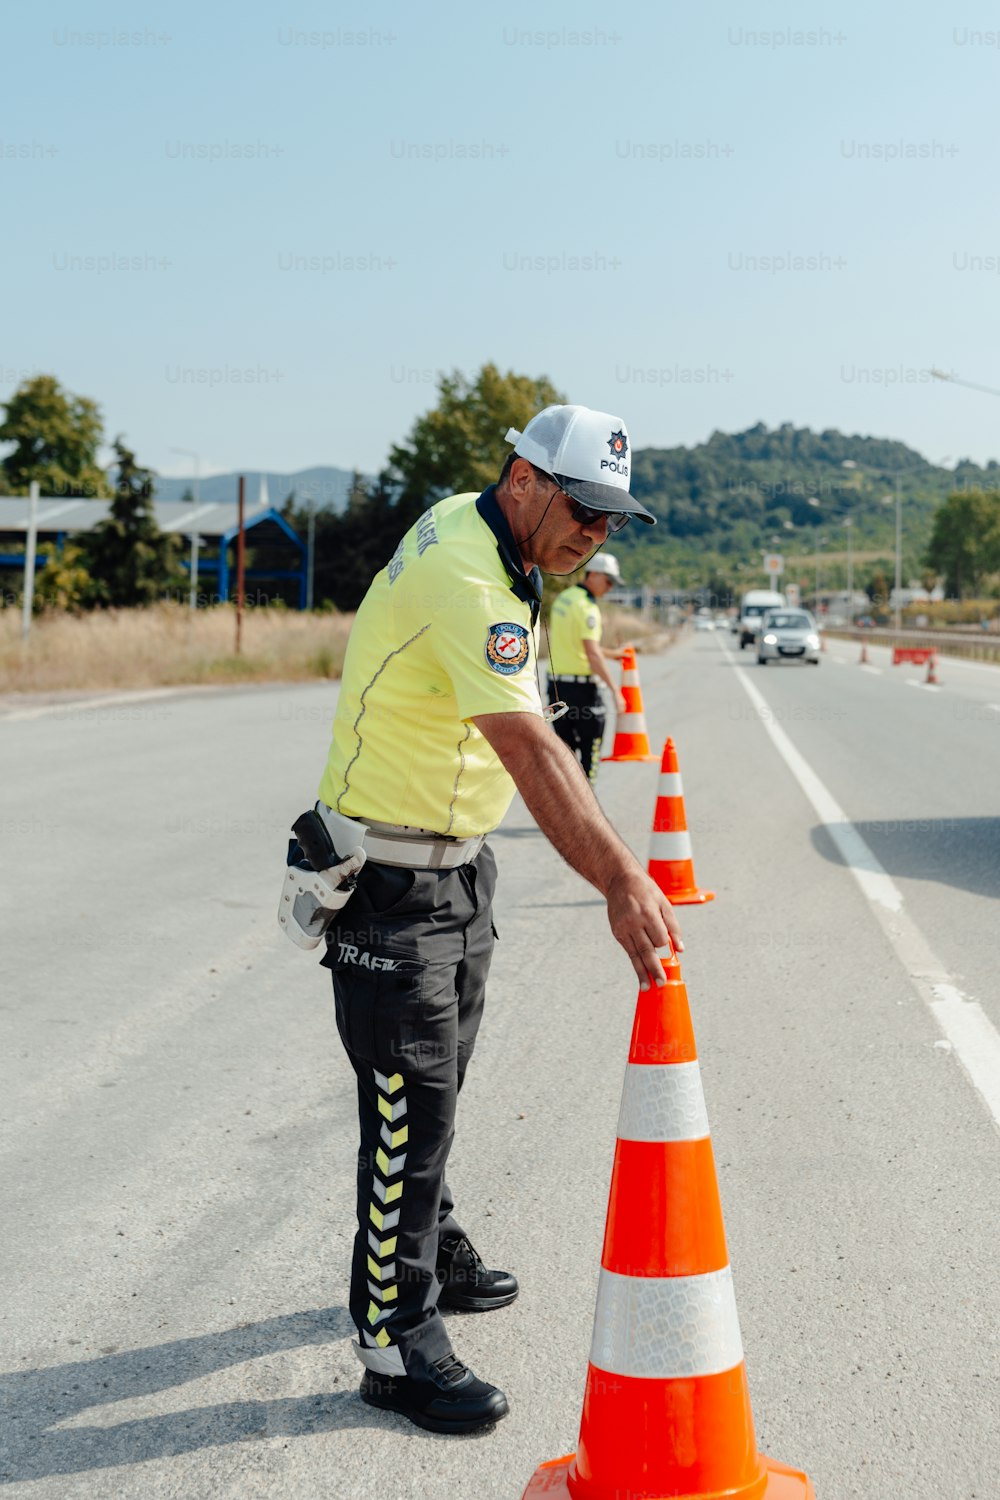 a police officer directing traffic on a highway